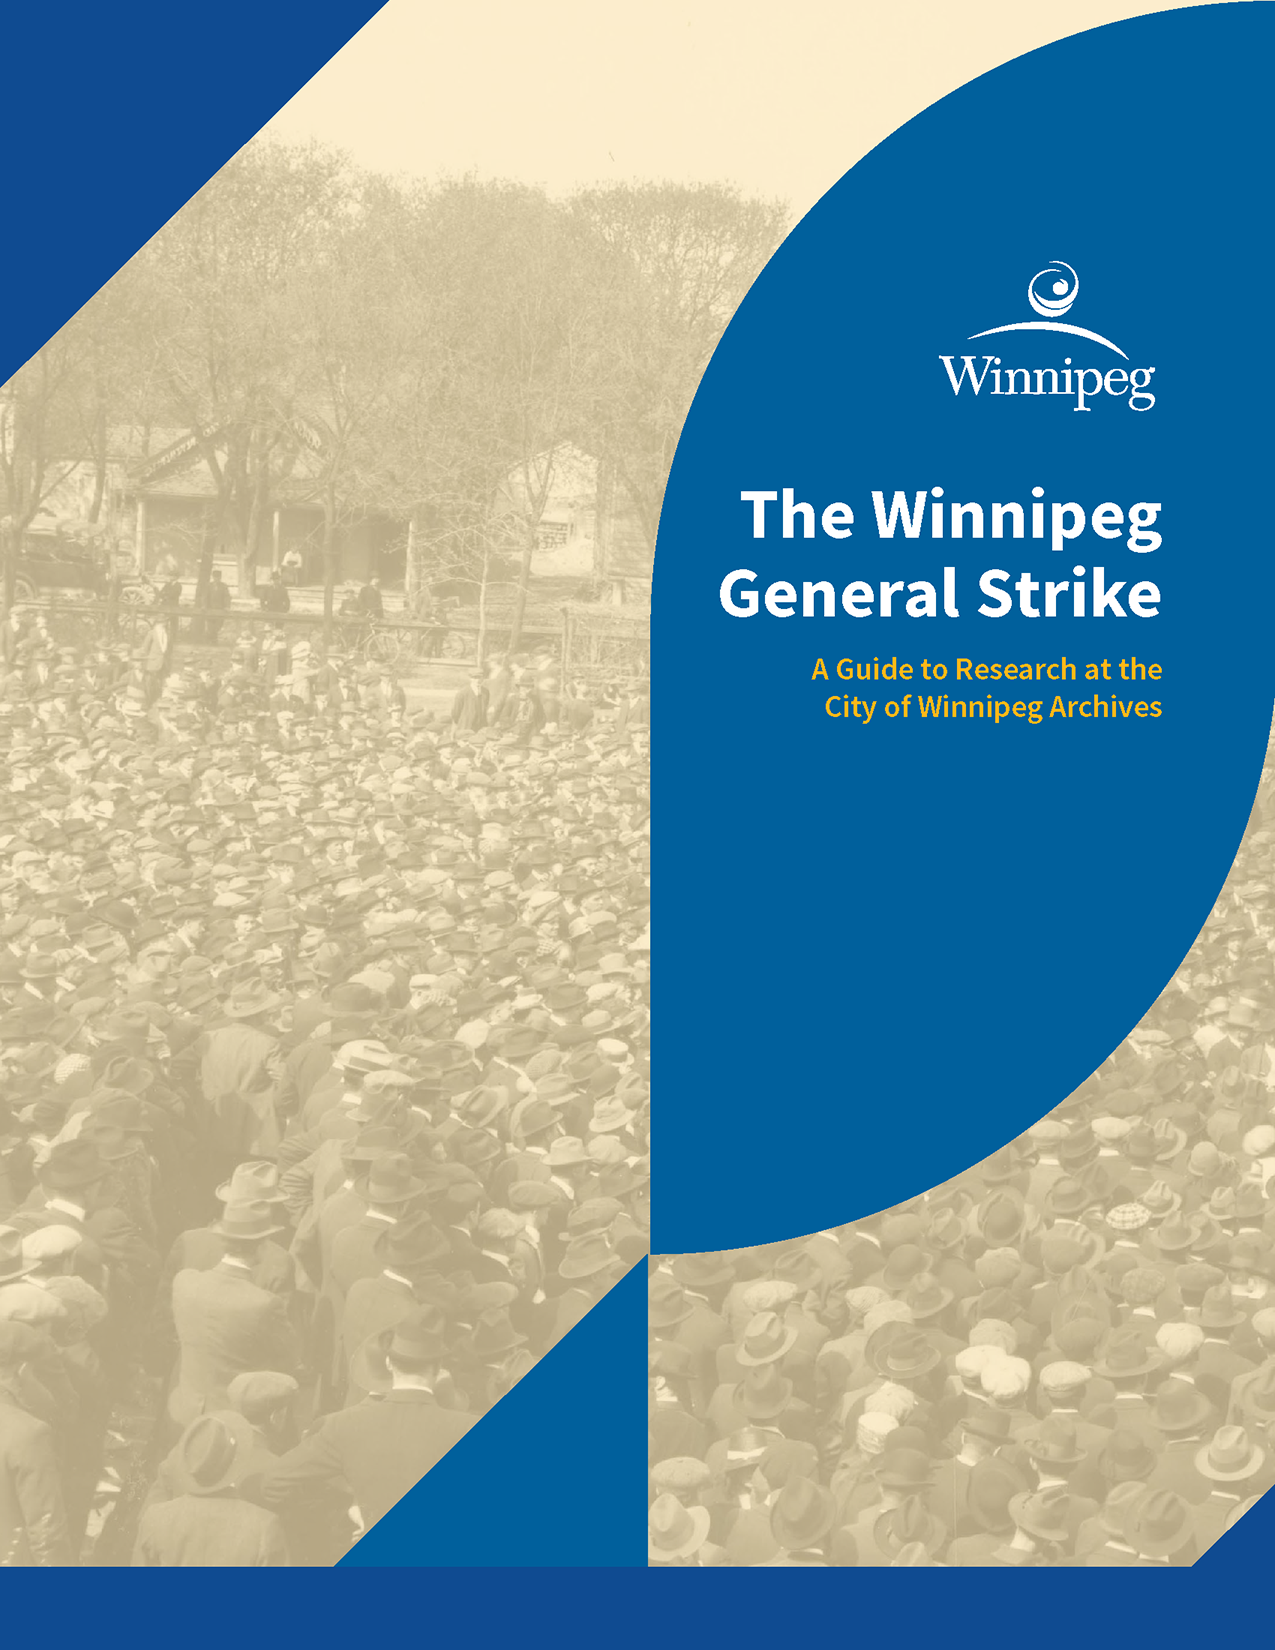 The Winnipeg General Strike: A Guide to Research at the City of Winnipeg Archives